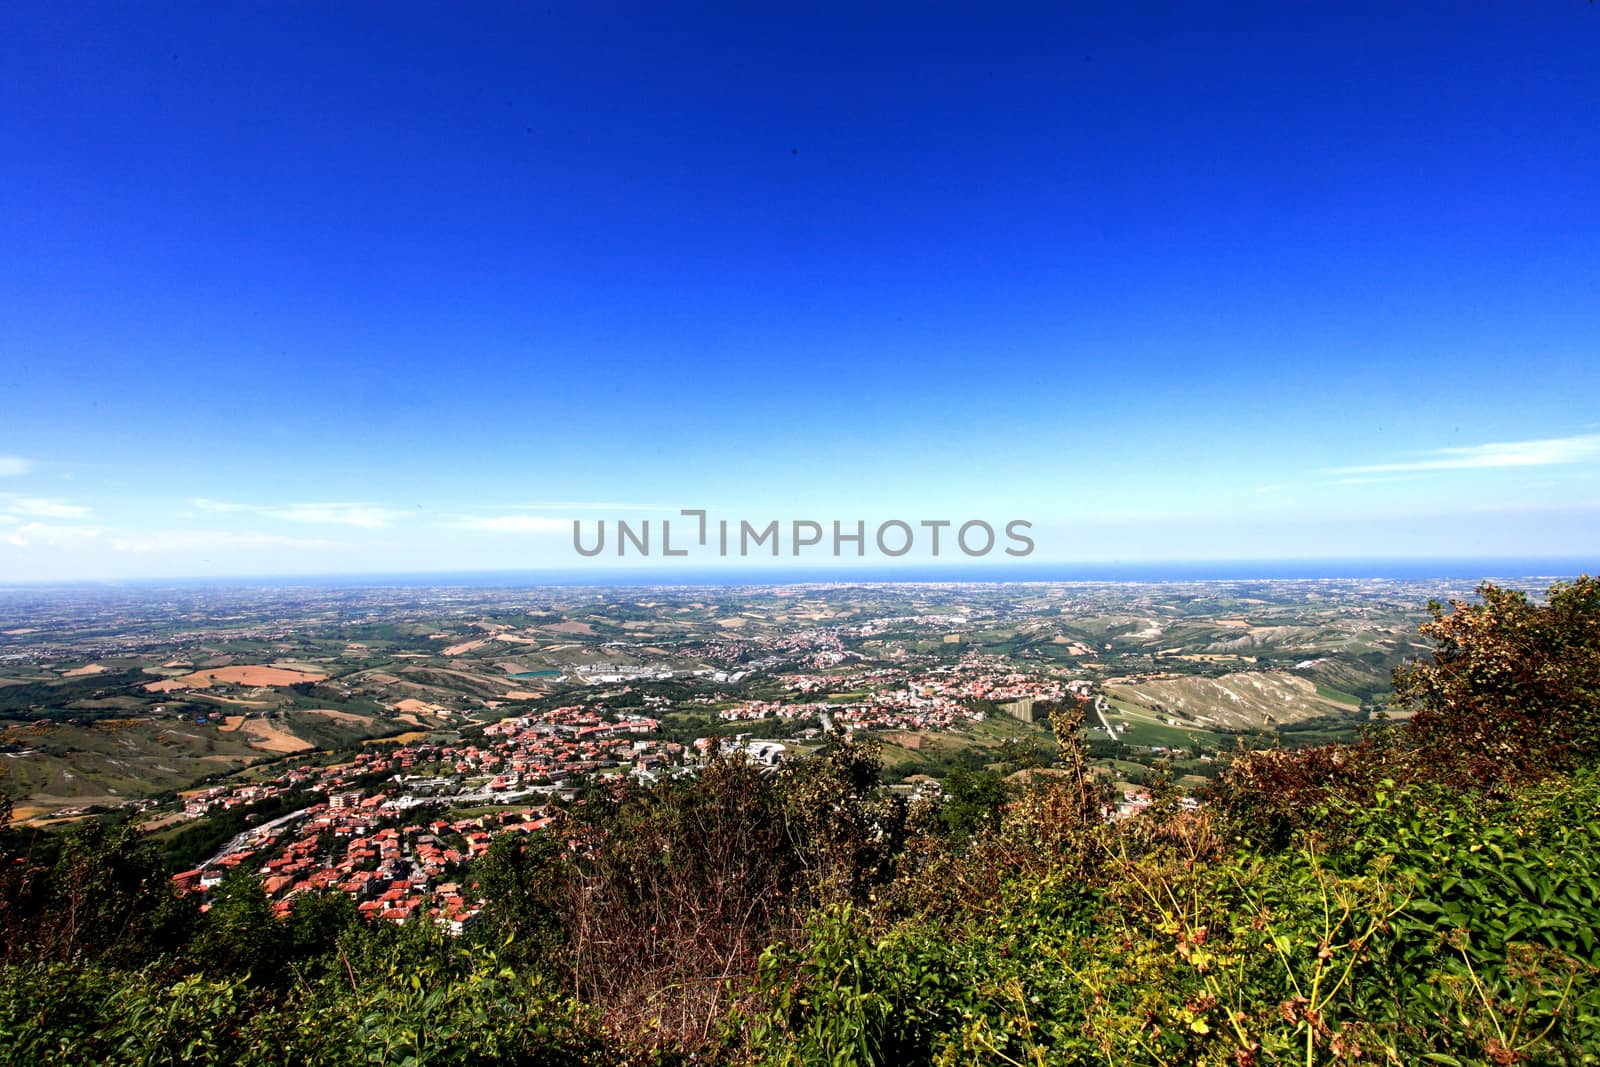 Panoramic view of the plain from the san marino castle